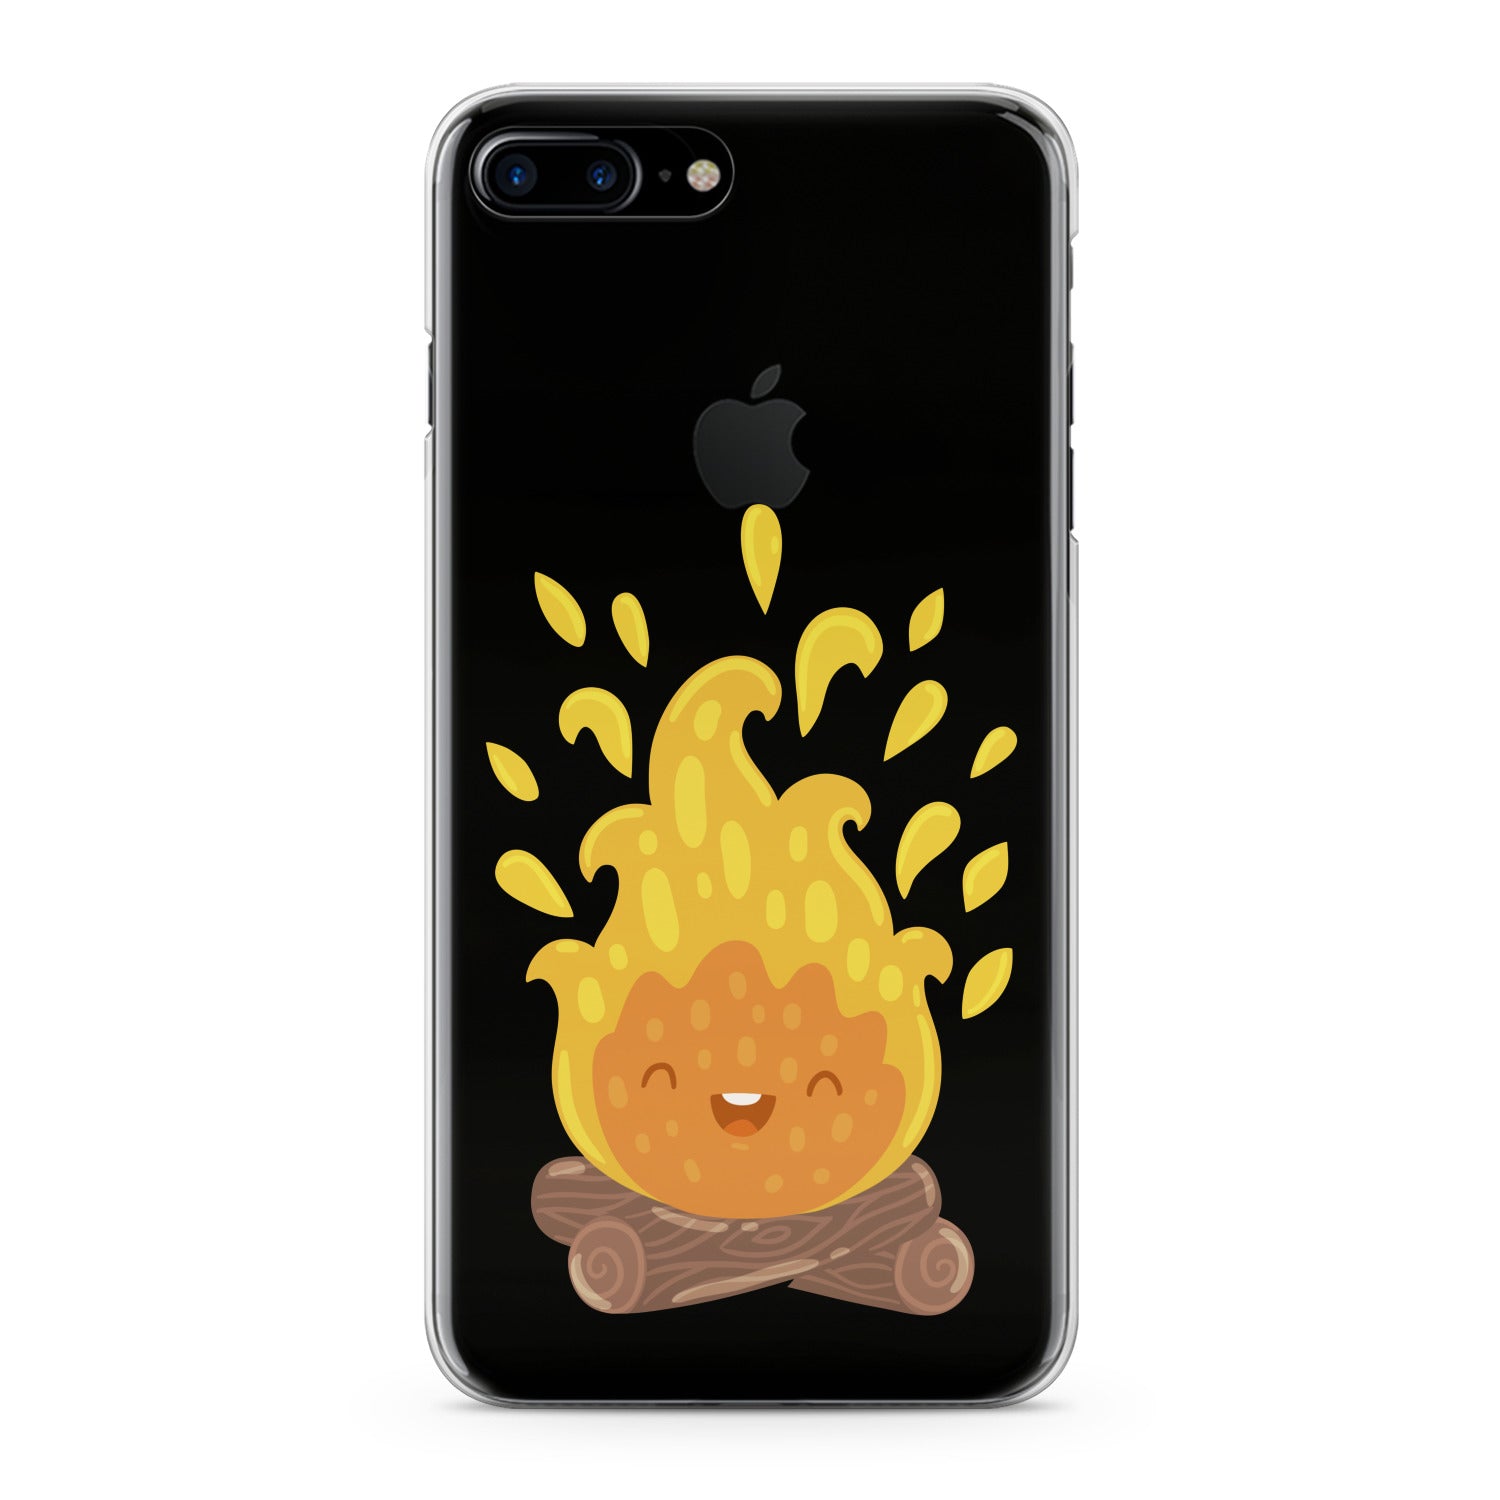 Lex Altern Kawaii Firing Lumber Phone Case for your iPhone & Android phone.